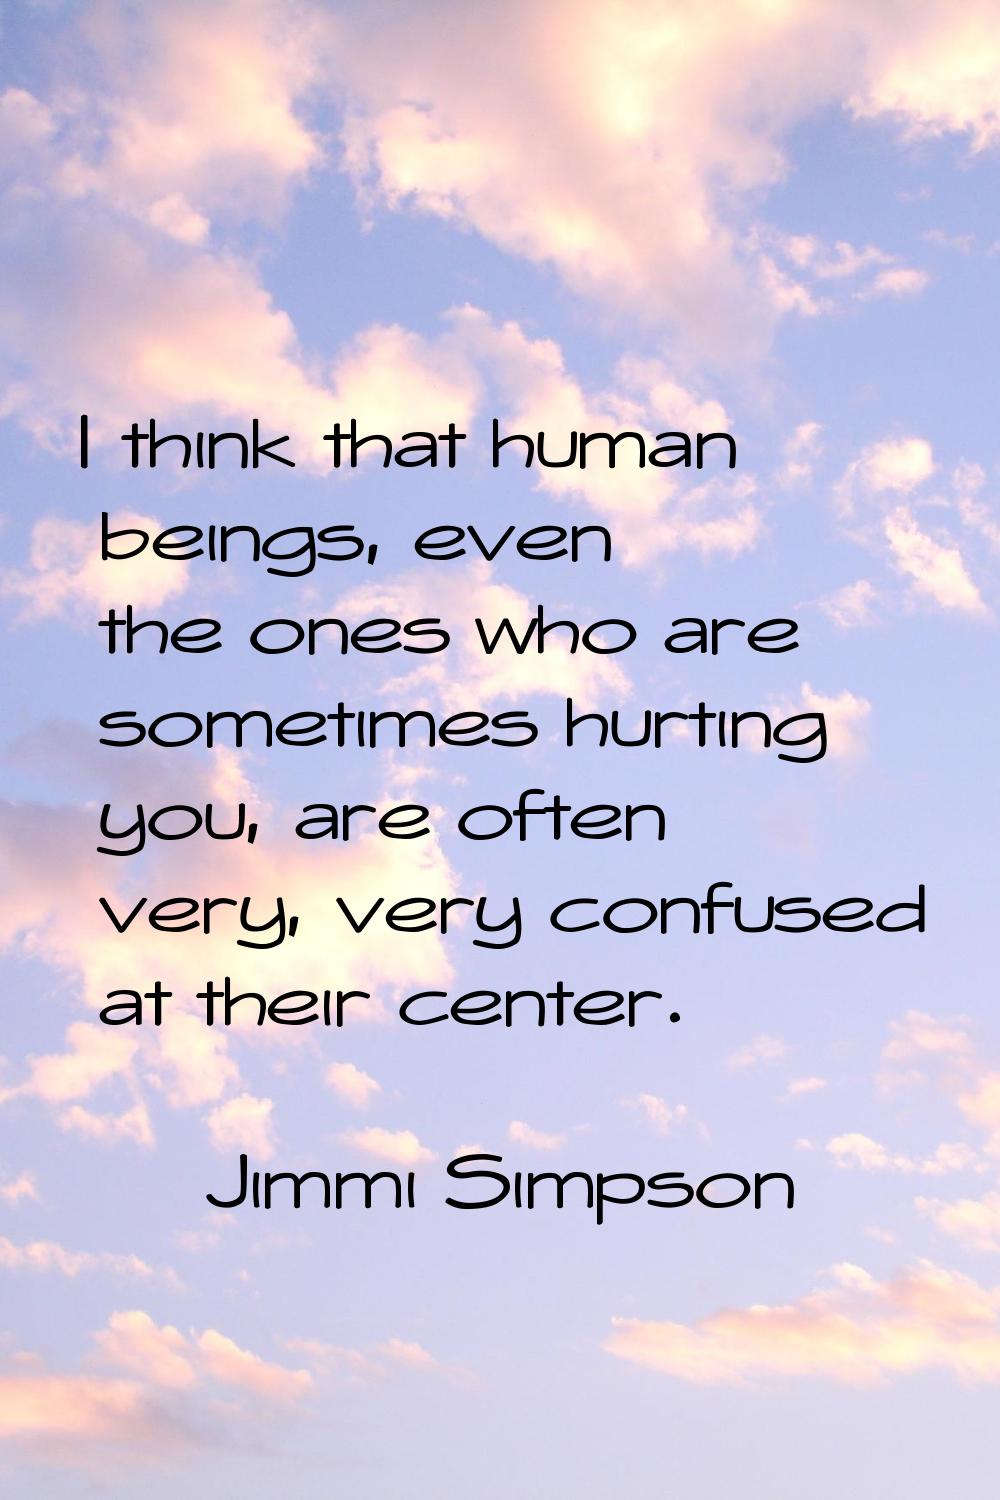 I think that human beings, even the ones who are sometimes hurting you, are often very, very confus